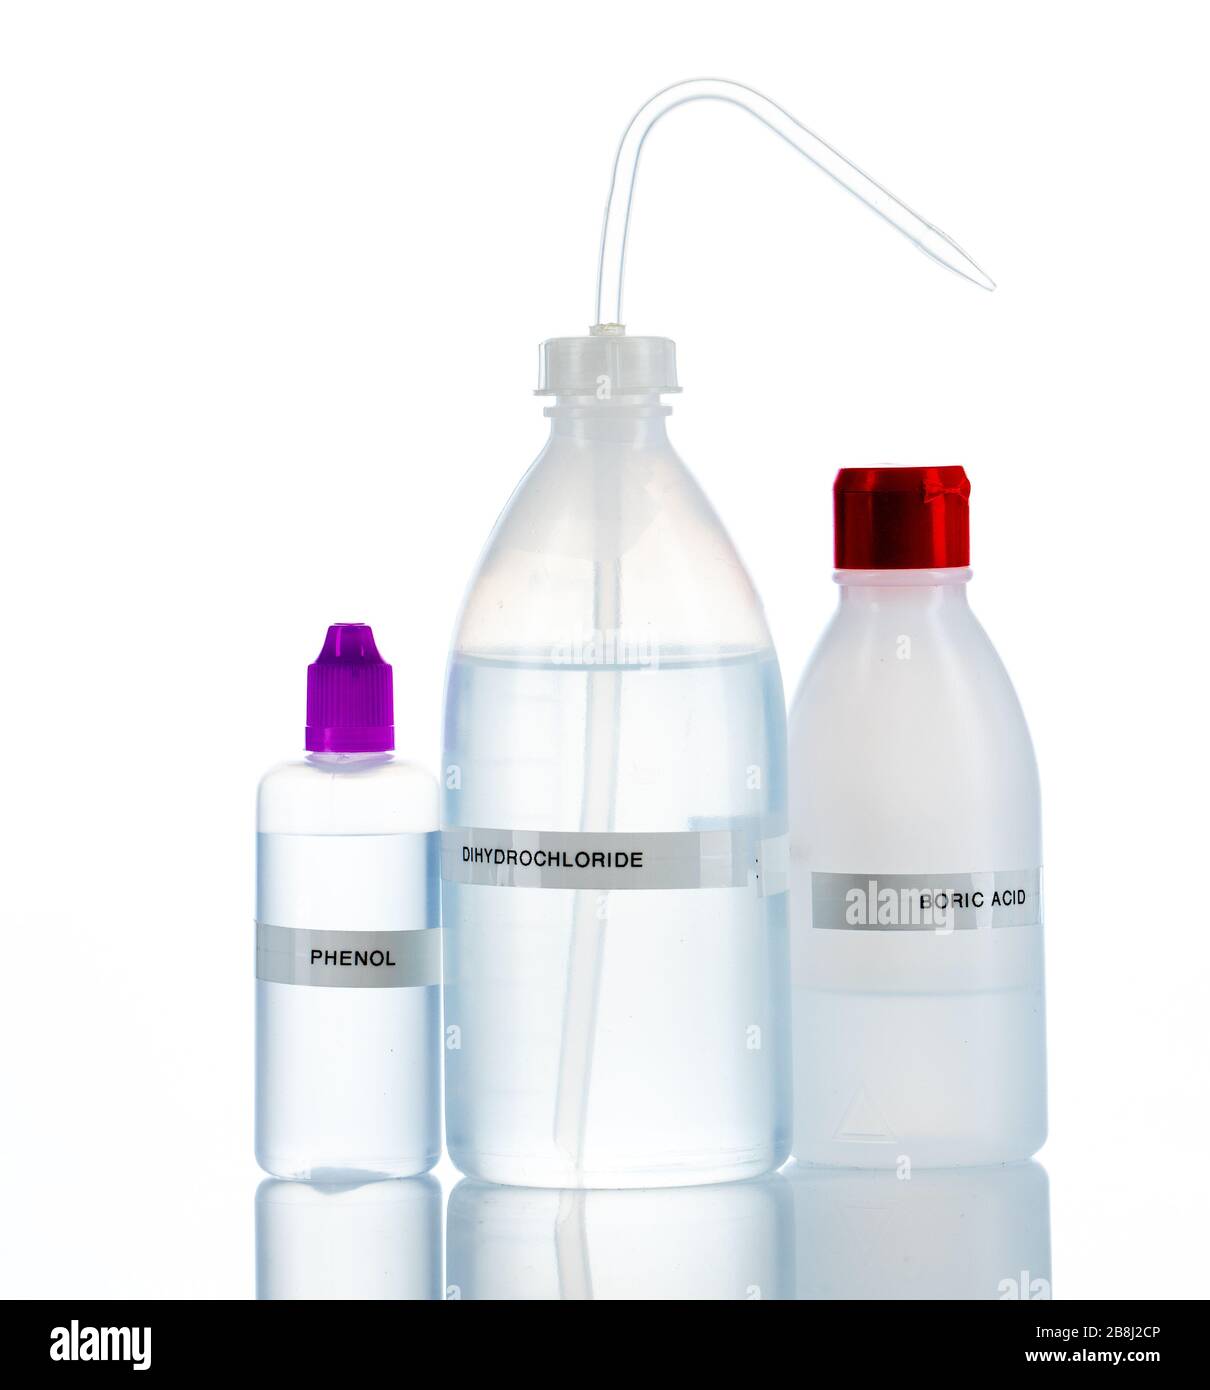 disinfectant, sanitizer in plastic packaging on a white background Stock Photo